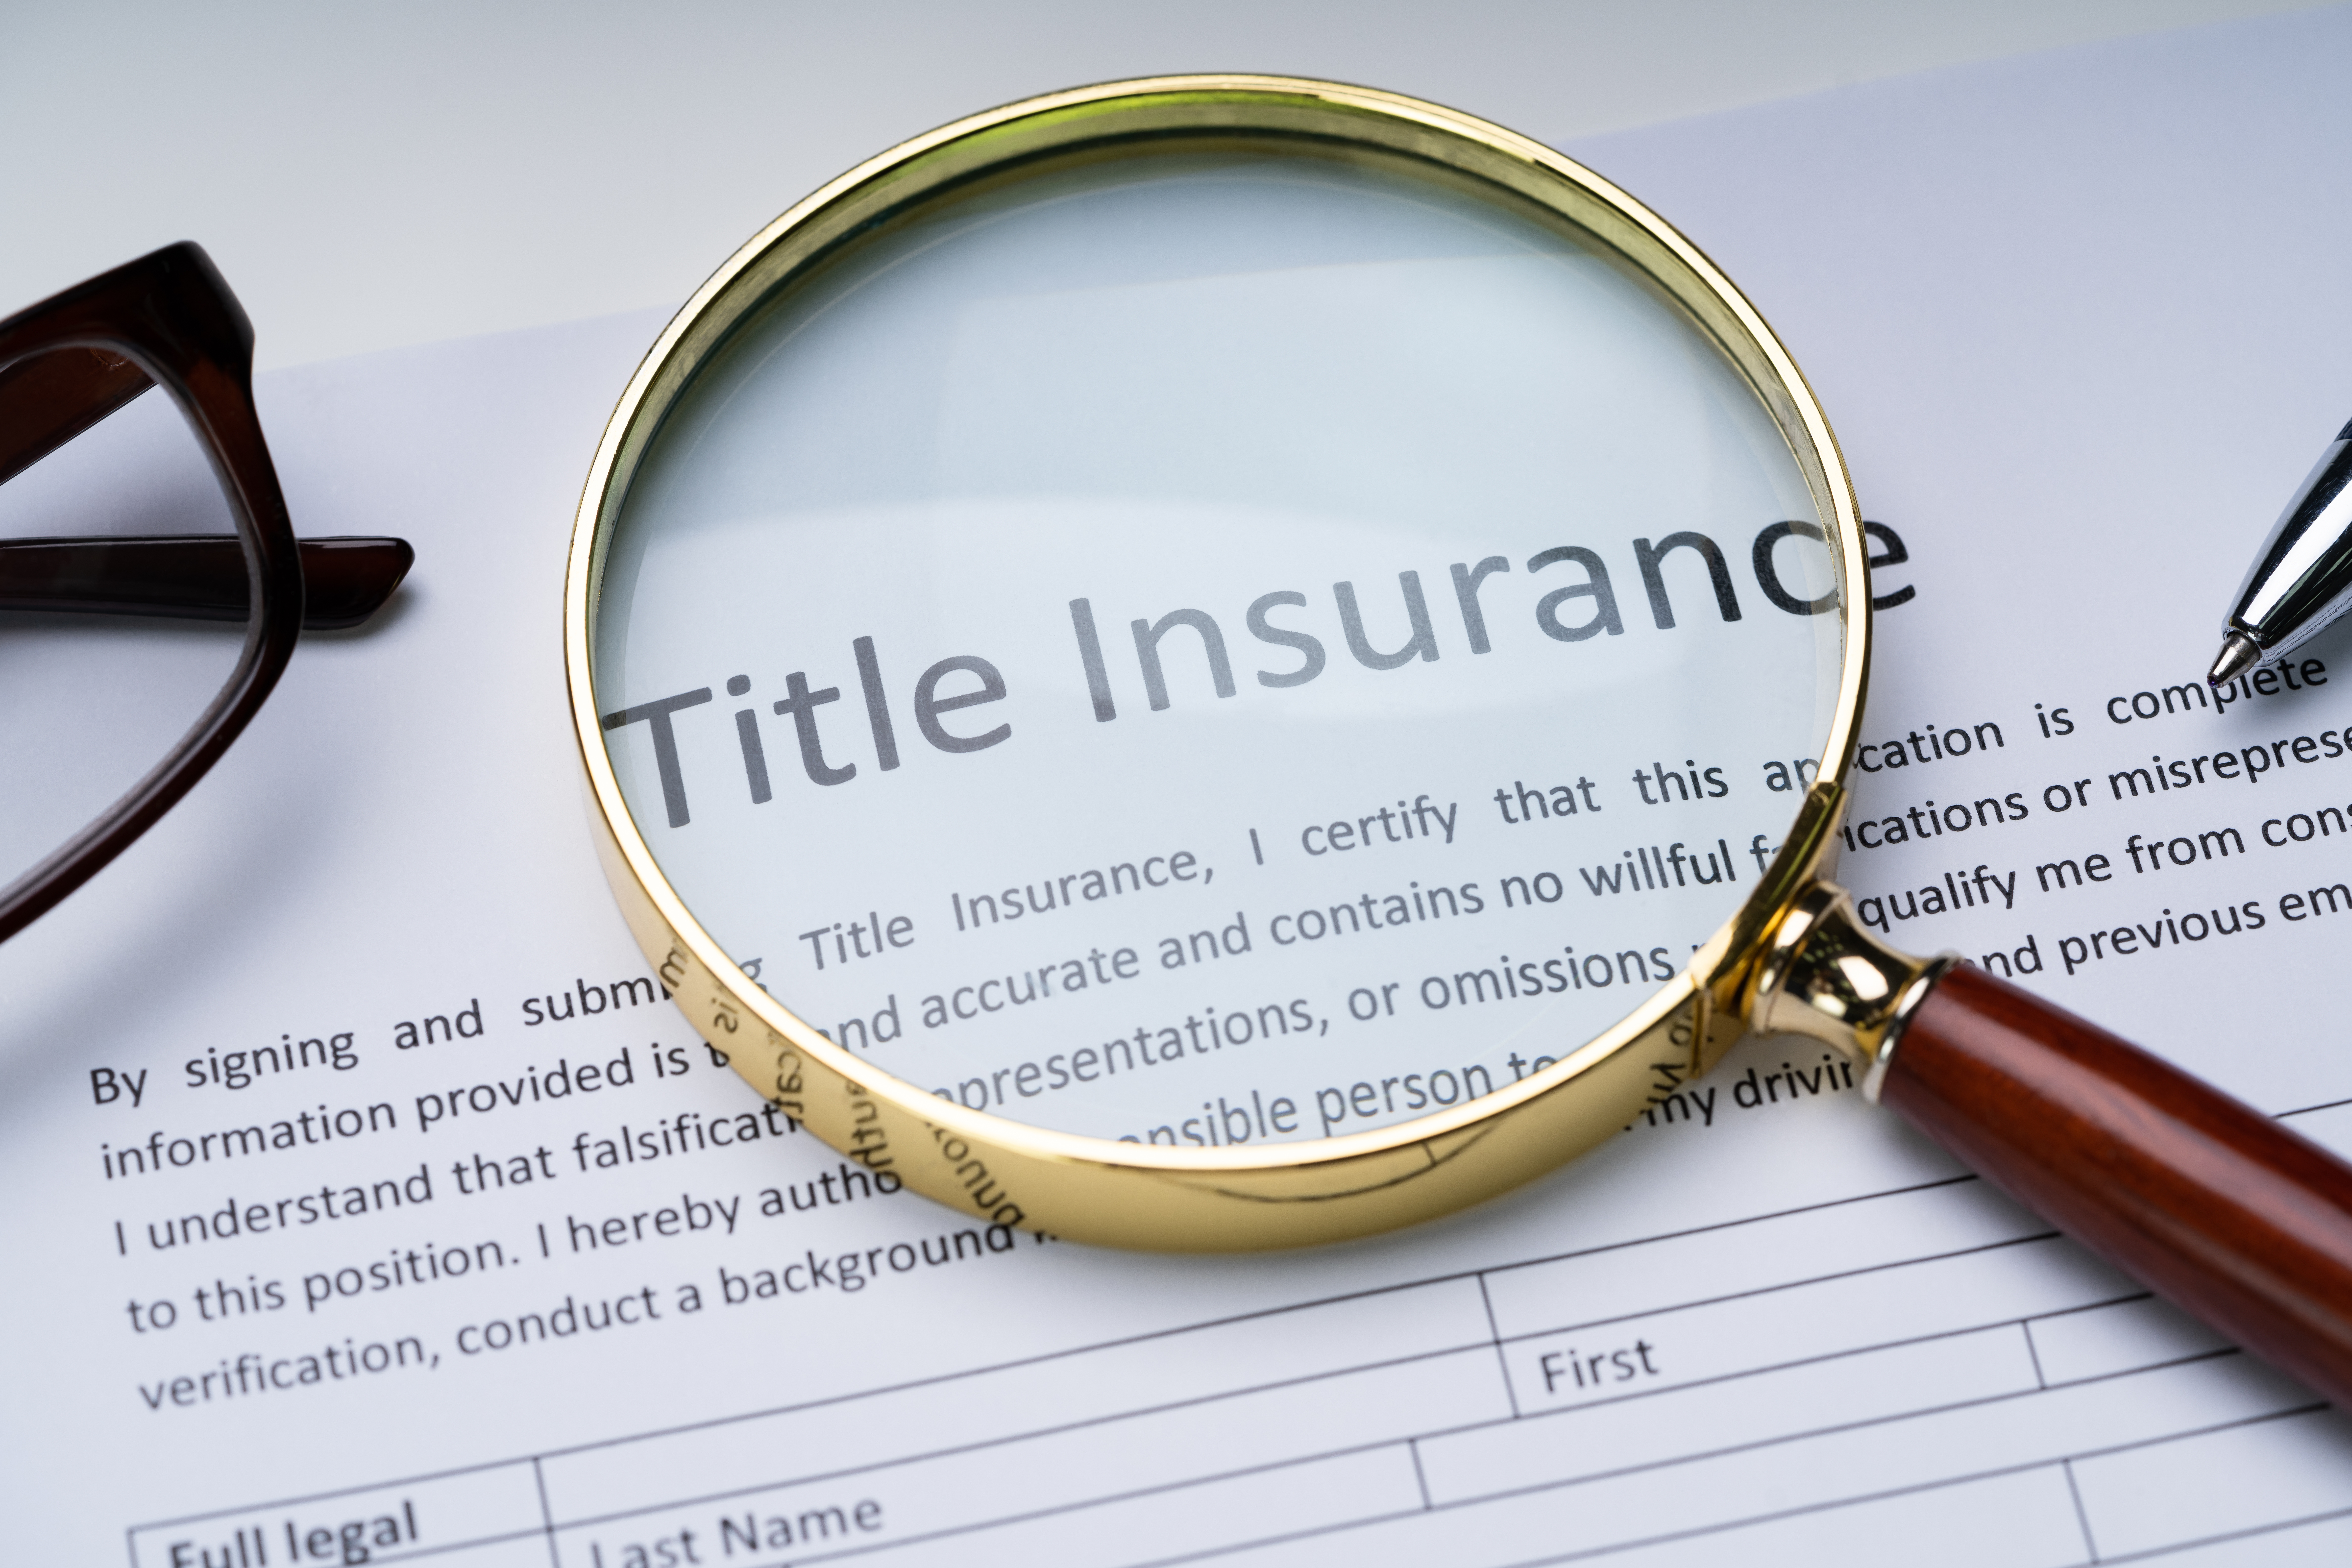 What problems does Title Insurance Cover?